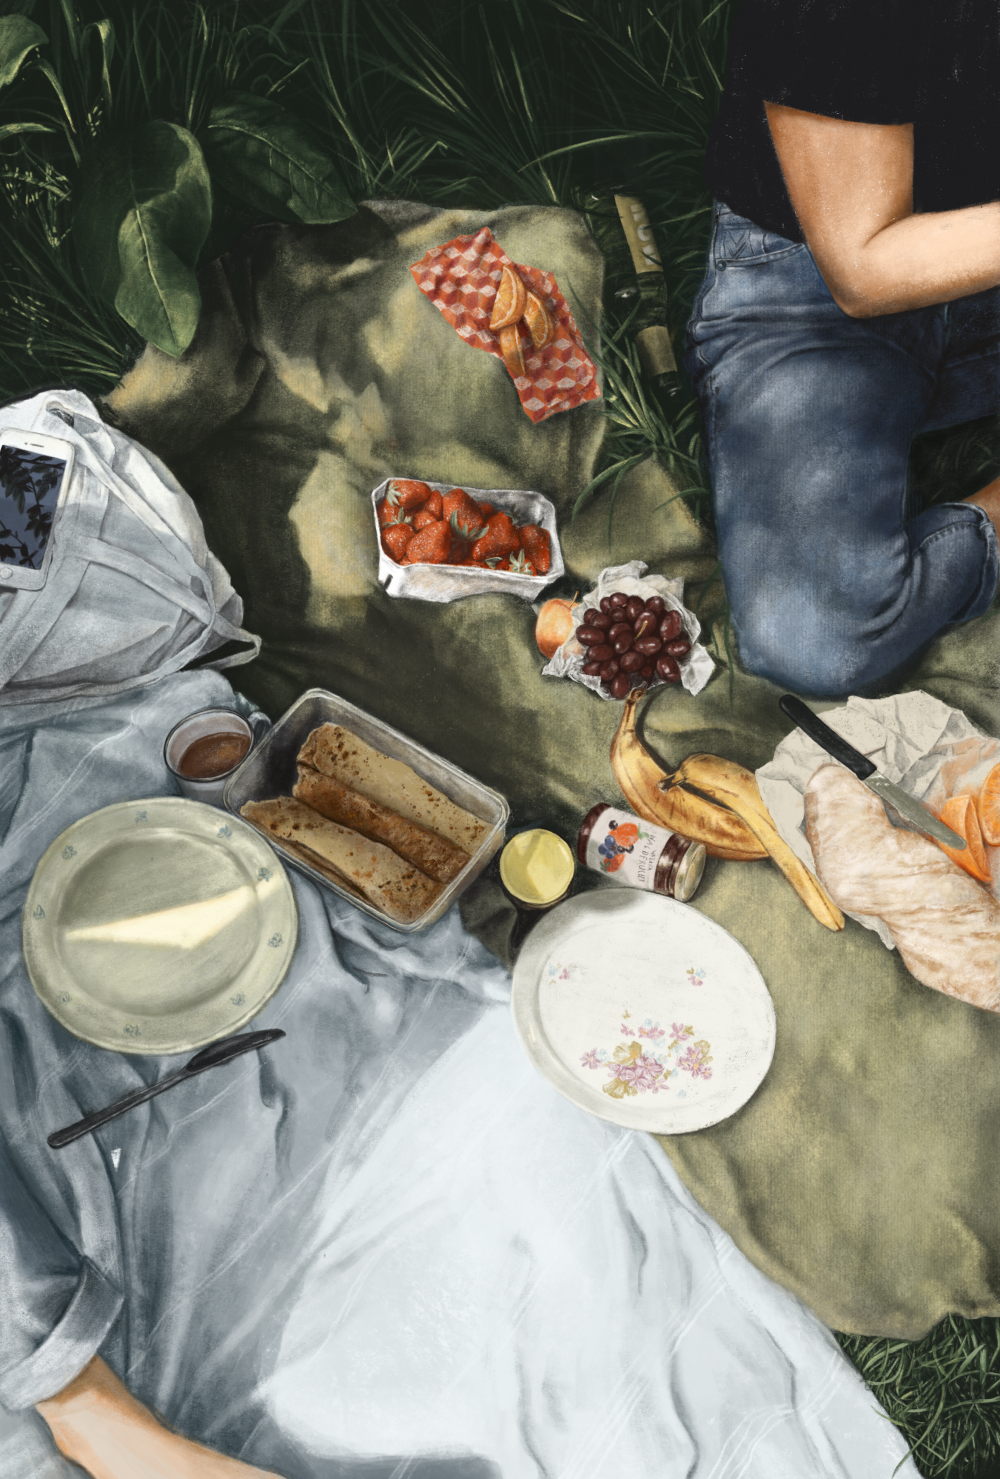 illustration of a picknick with friends